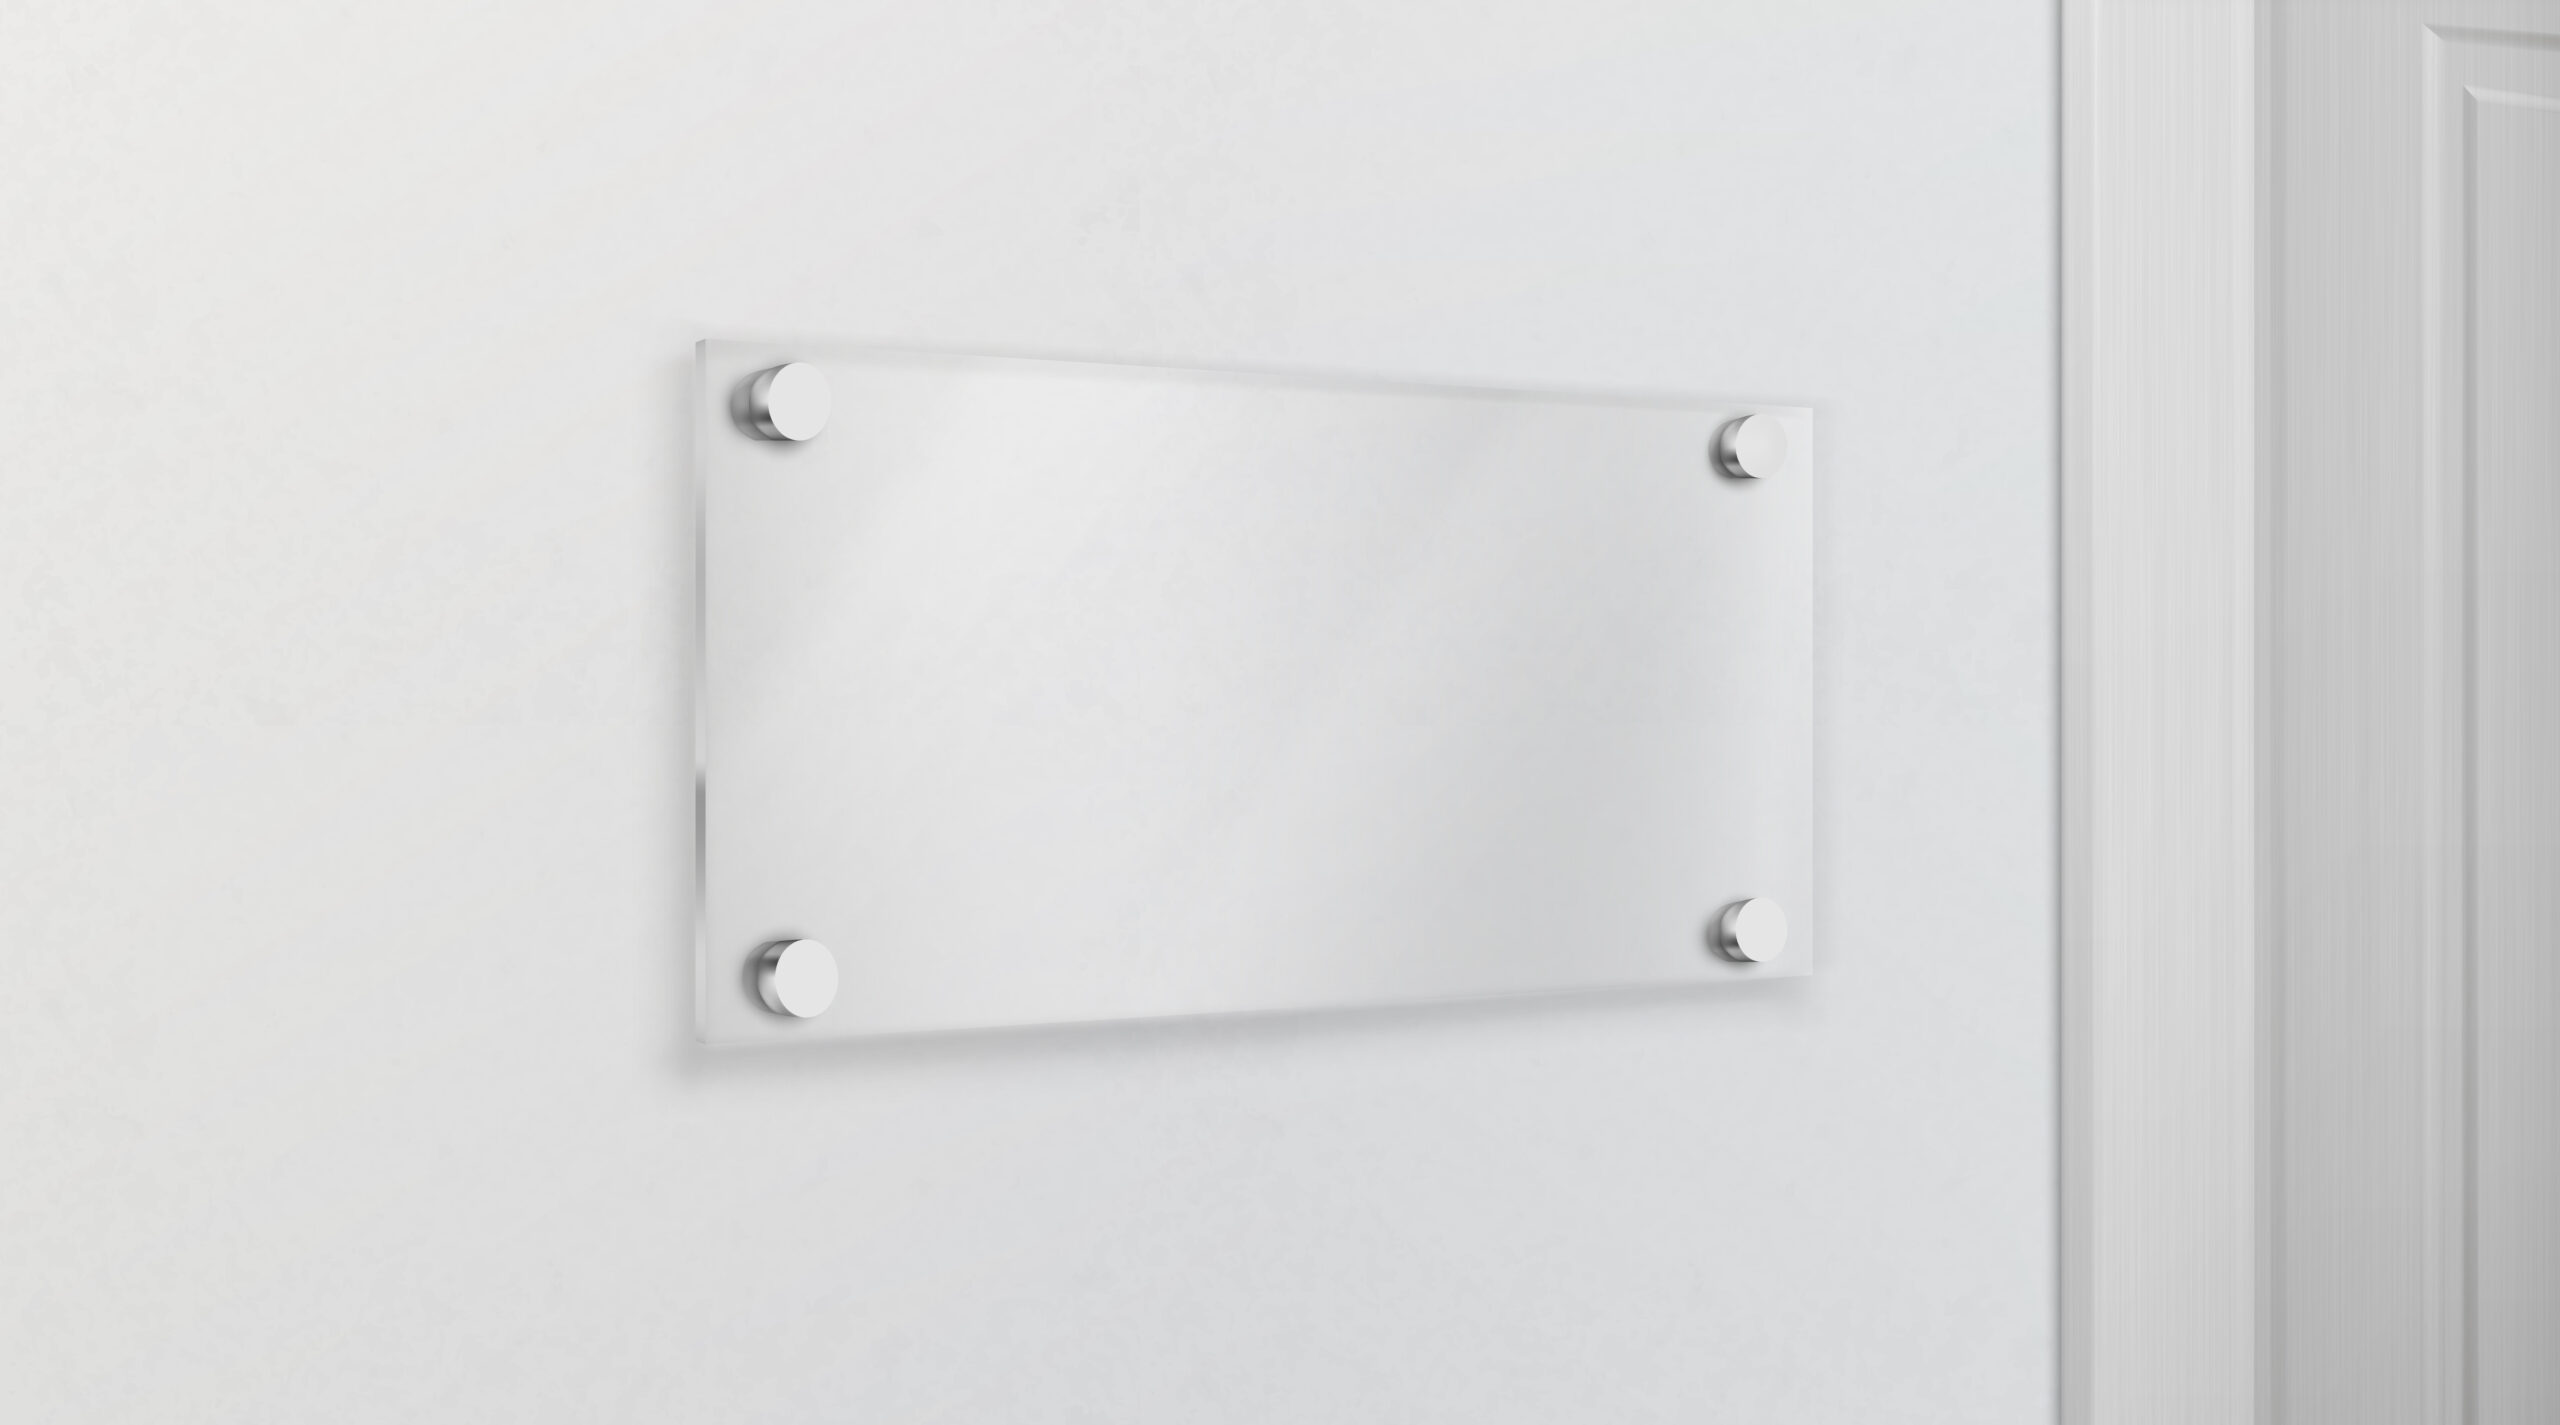 Empty glass name plate bolted to wall near doorway. Poster, banner empty holder, picture transparent frame mock-up. Office, exhibition gallery interior design element 3d realistic vector illustration